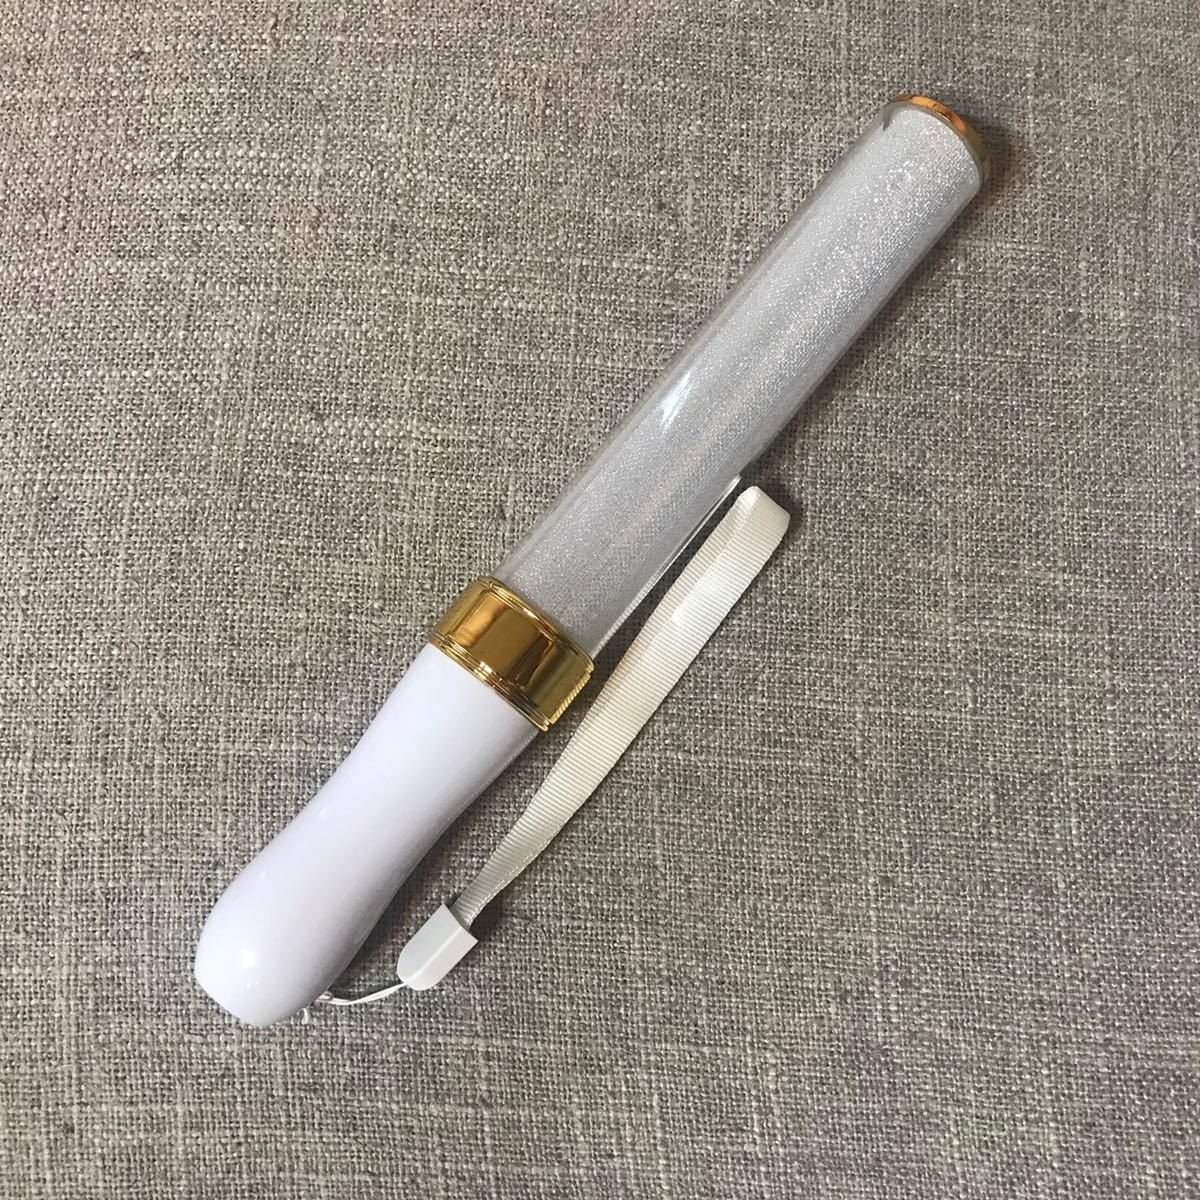 *LED pen light gold 15 color 1 pcs * gold blur new goods the same day & anonymity shipping!